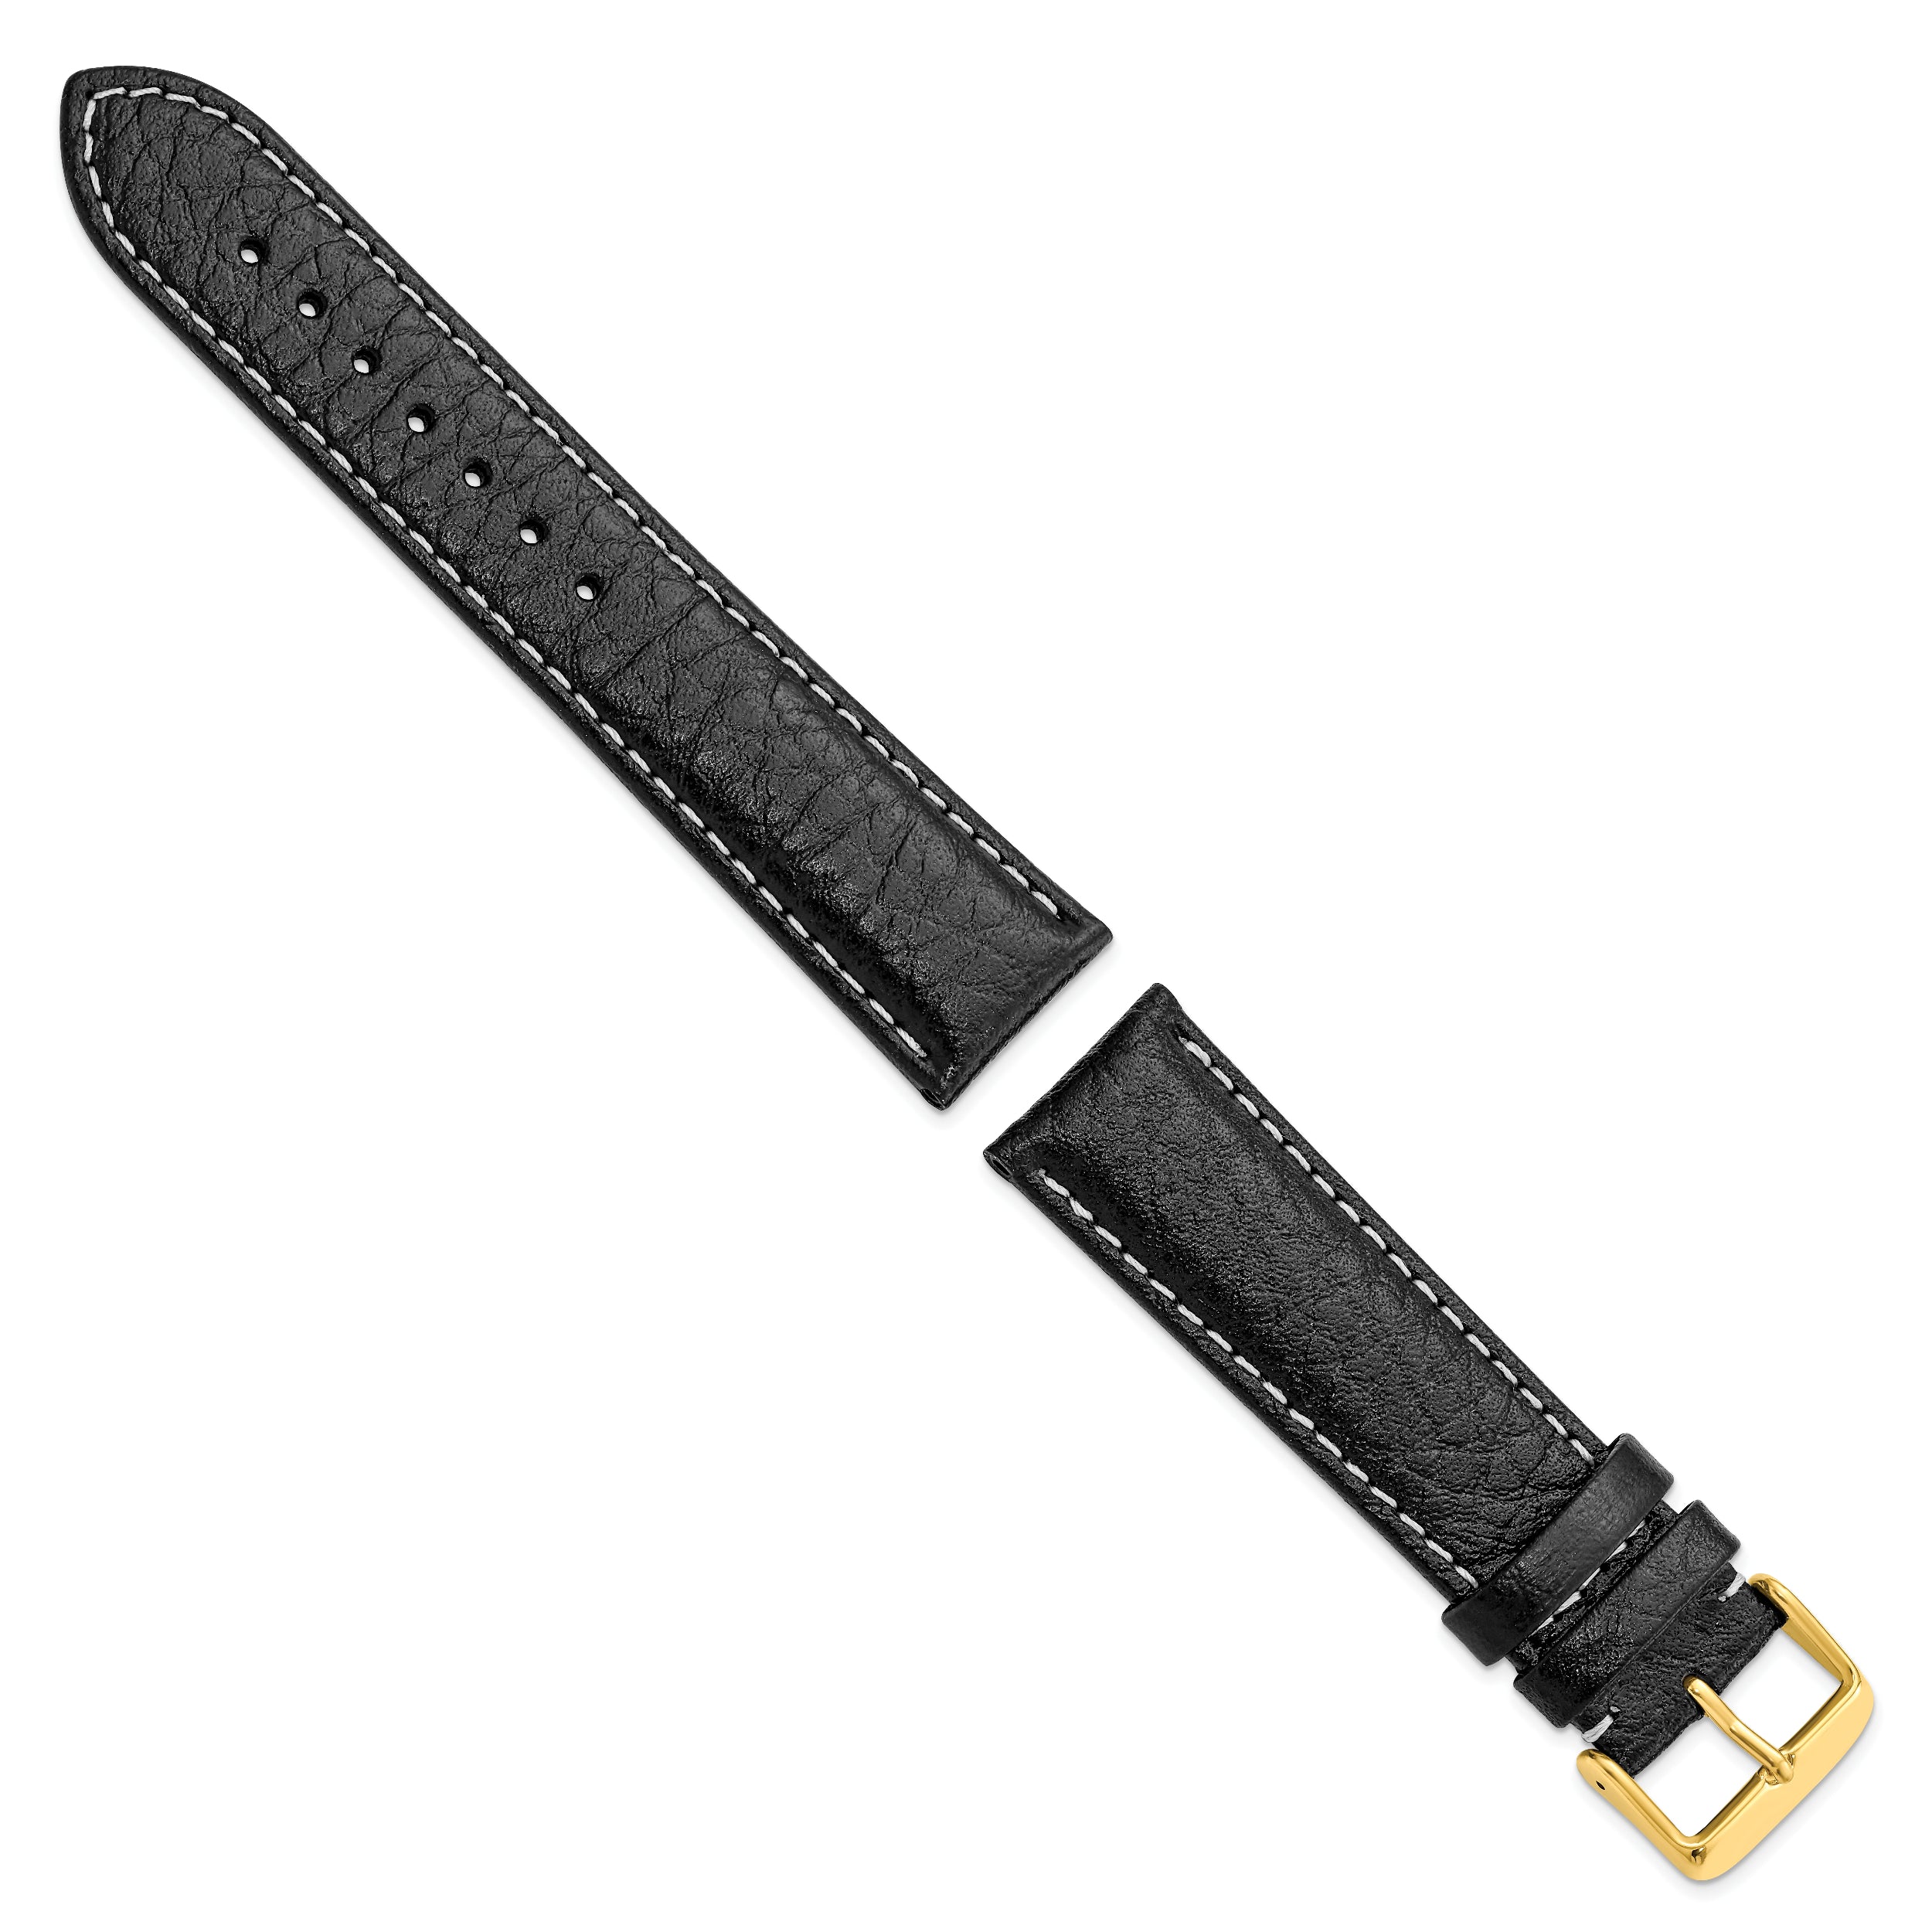 12mm Black Sport Leather with White Stitching and Gold-tone Buckle 6.75 inch Watch Band